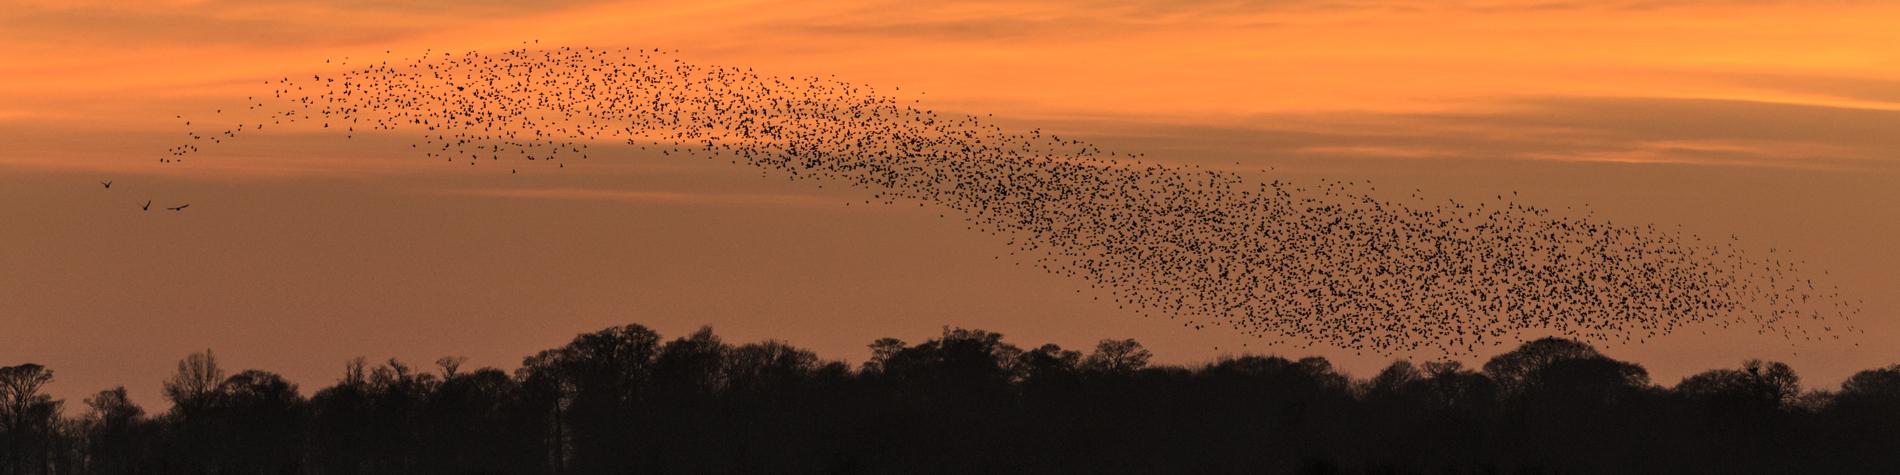 Starling murmurations in South Yorkshire